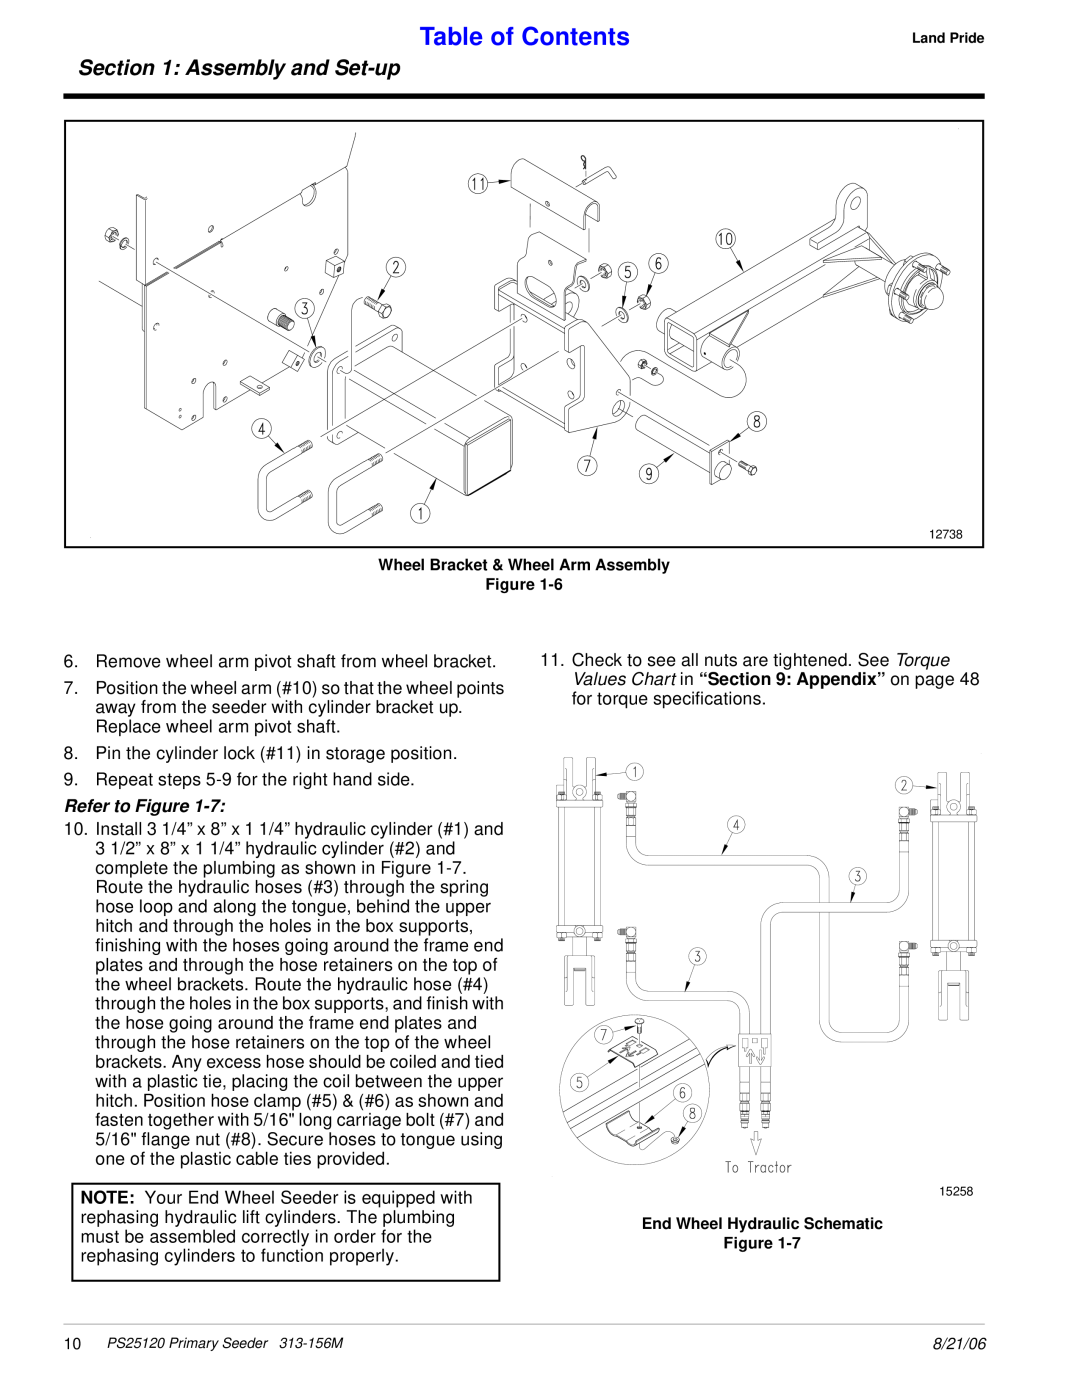 Land Pride PS25120 manual Table of Contents, Assembly and Set-up, Remove wheel arm pivot shaft from wheel bracket 